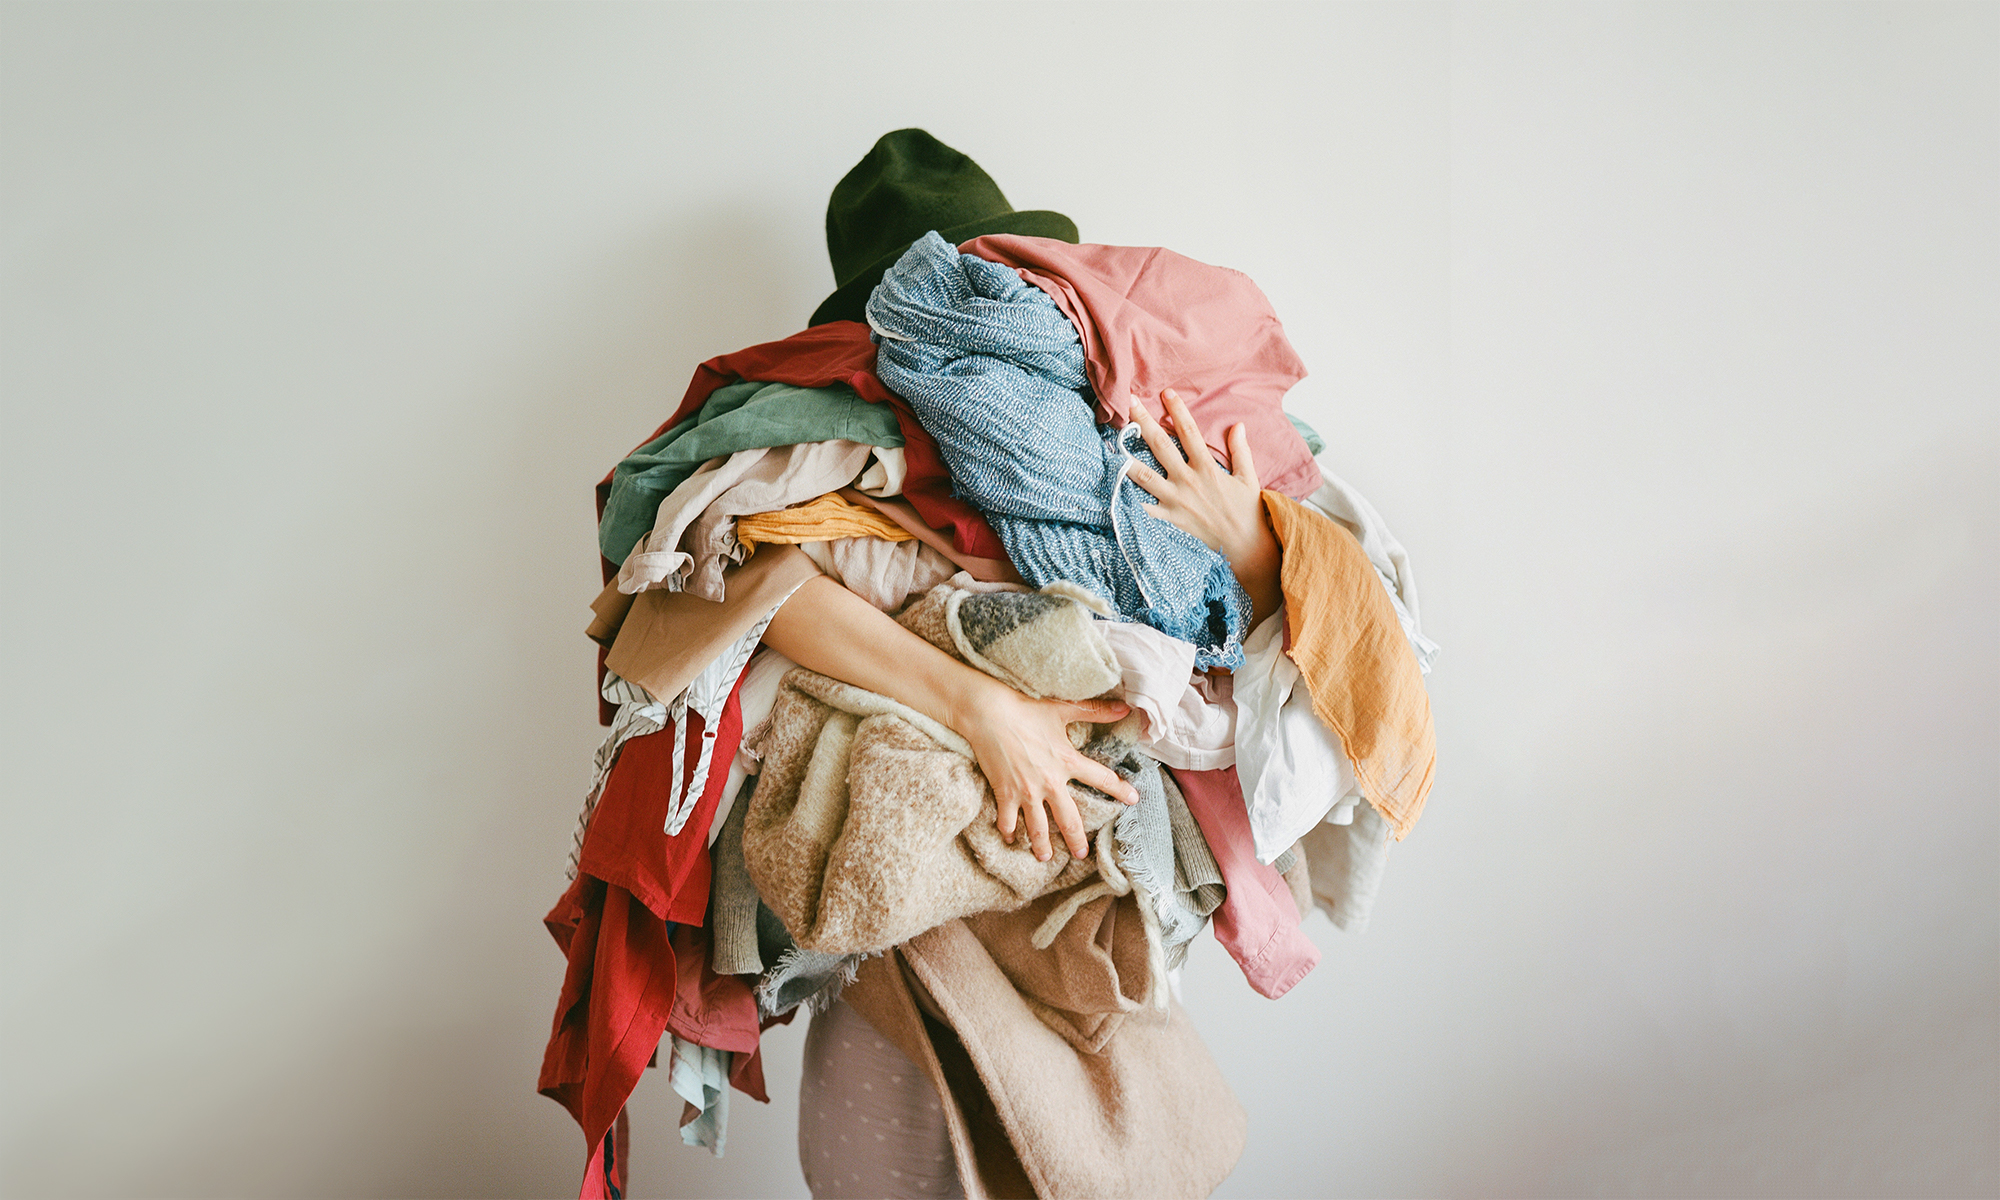 Want to make your wardrobe more sustainable? Cut your new clothing